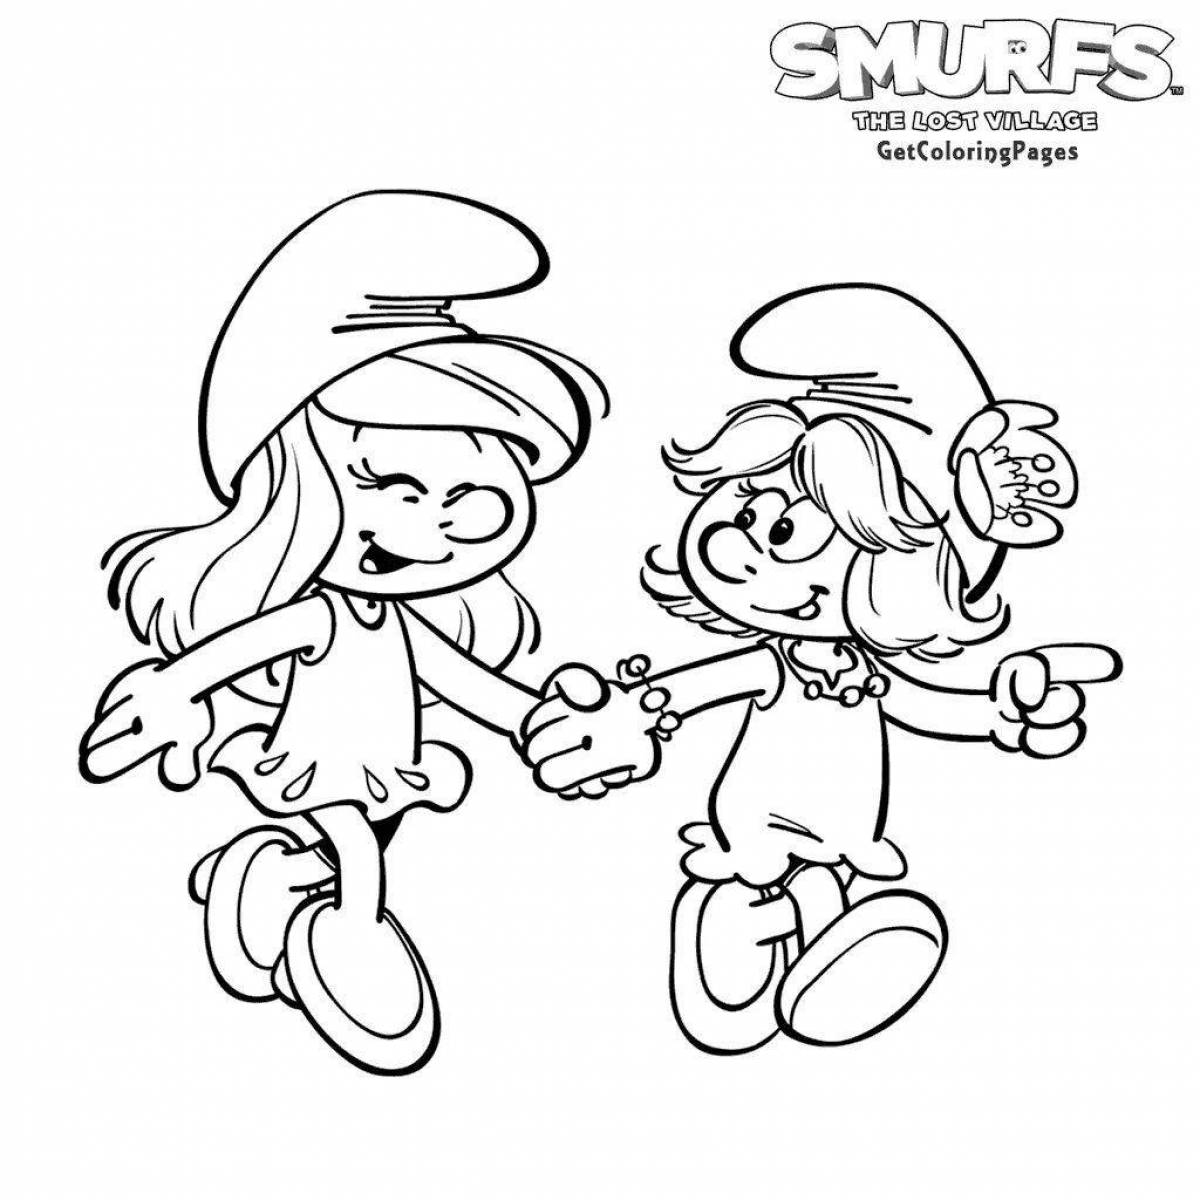 Animated smurfette coloring page